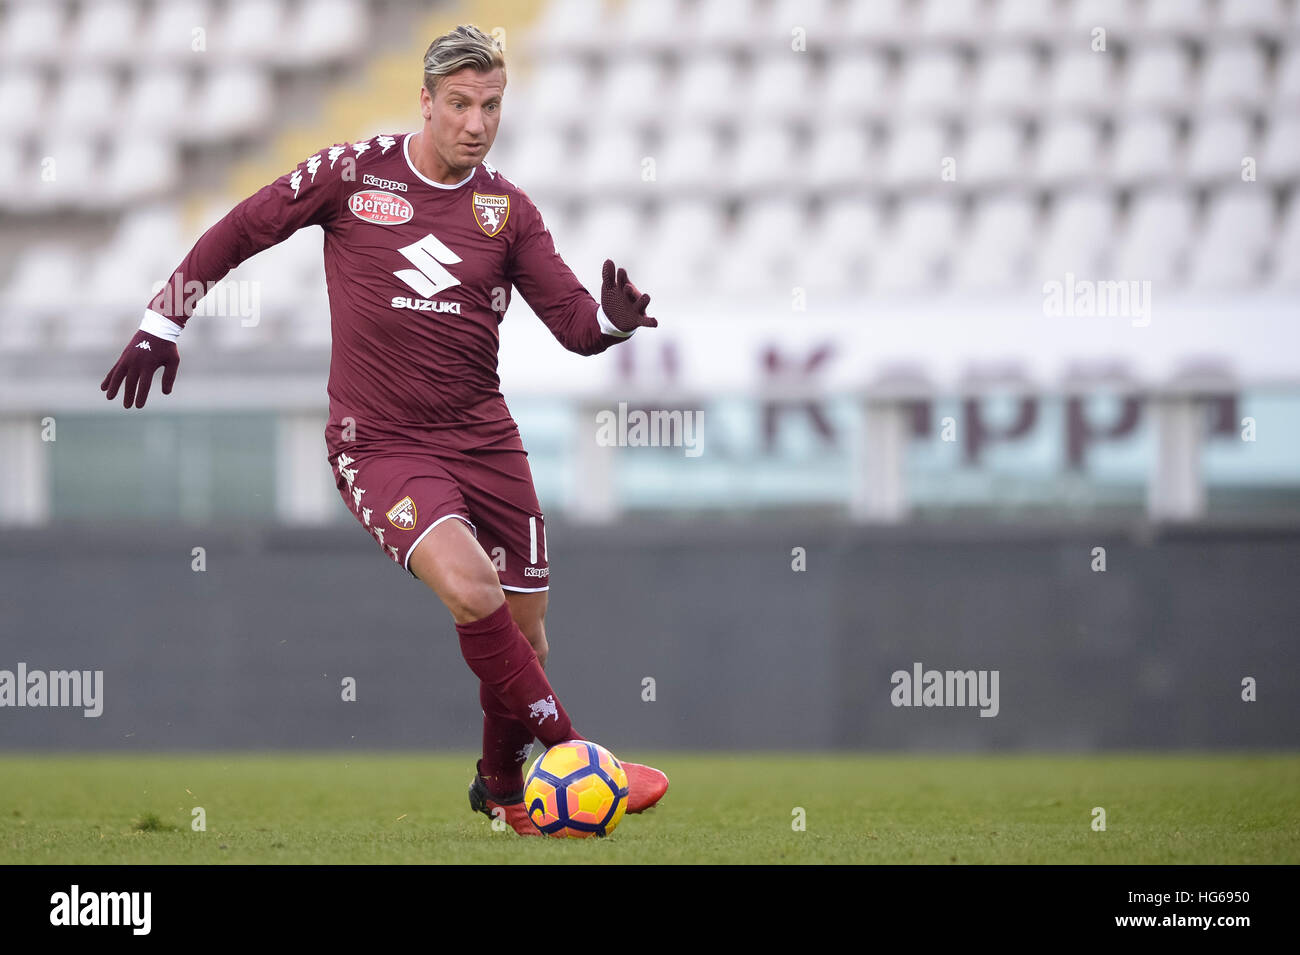 Turin, Italy. 4th Jan, 2017. Maxi Lopez of Torino FC in action during the friendly football match between Torino FC and SS Monza. Torino FC wins 1-0 over SS Monza. Credit: Nicolò Campo/Alamy Live News Stock Photo